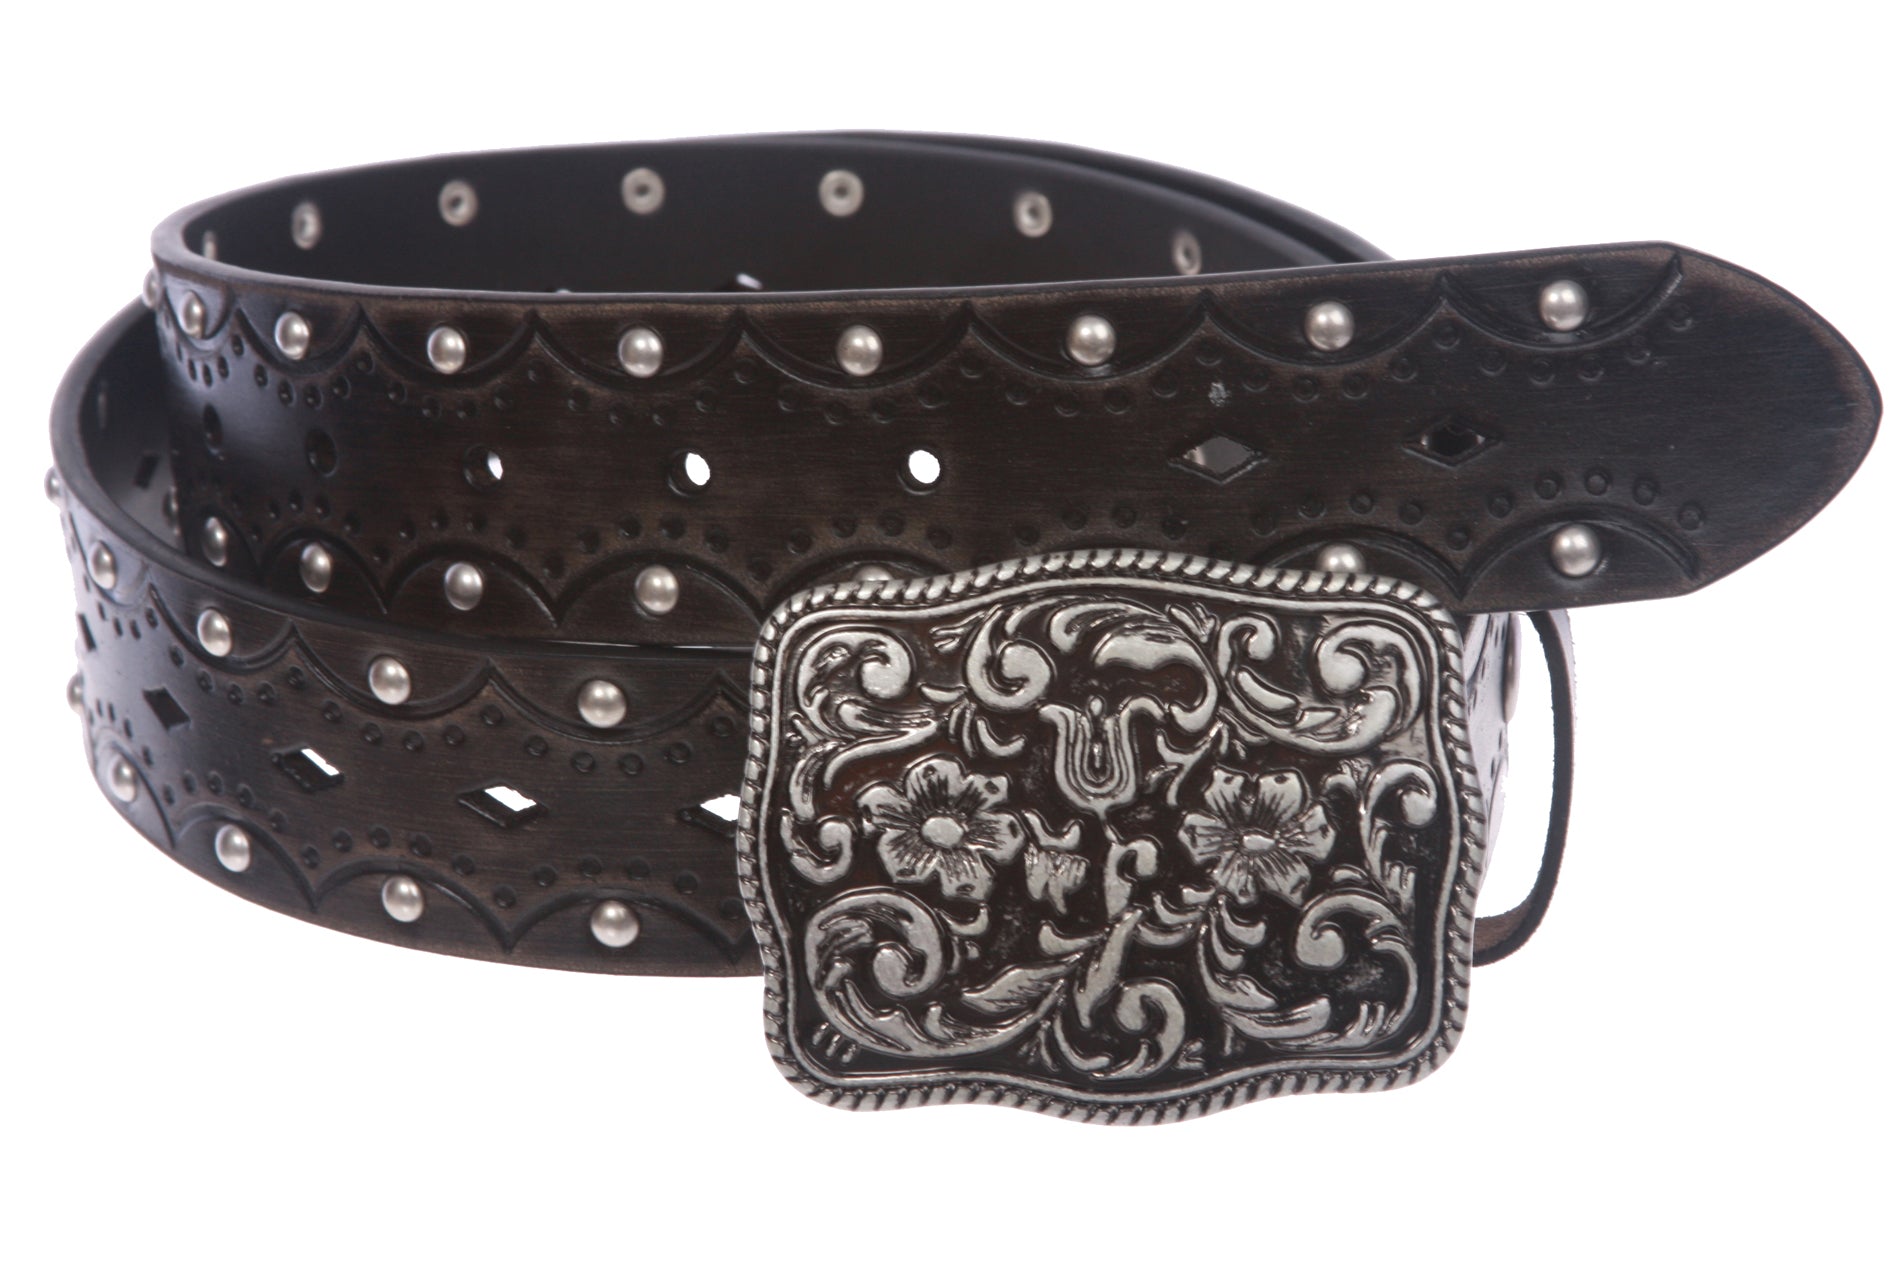 Women's Studded Western Floral Perforated Embossed Leather Belt